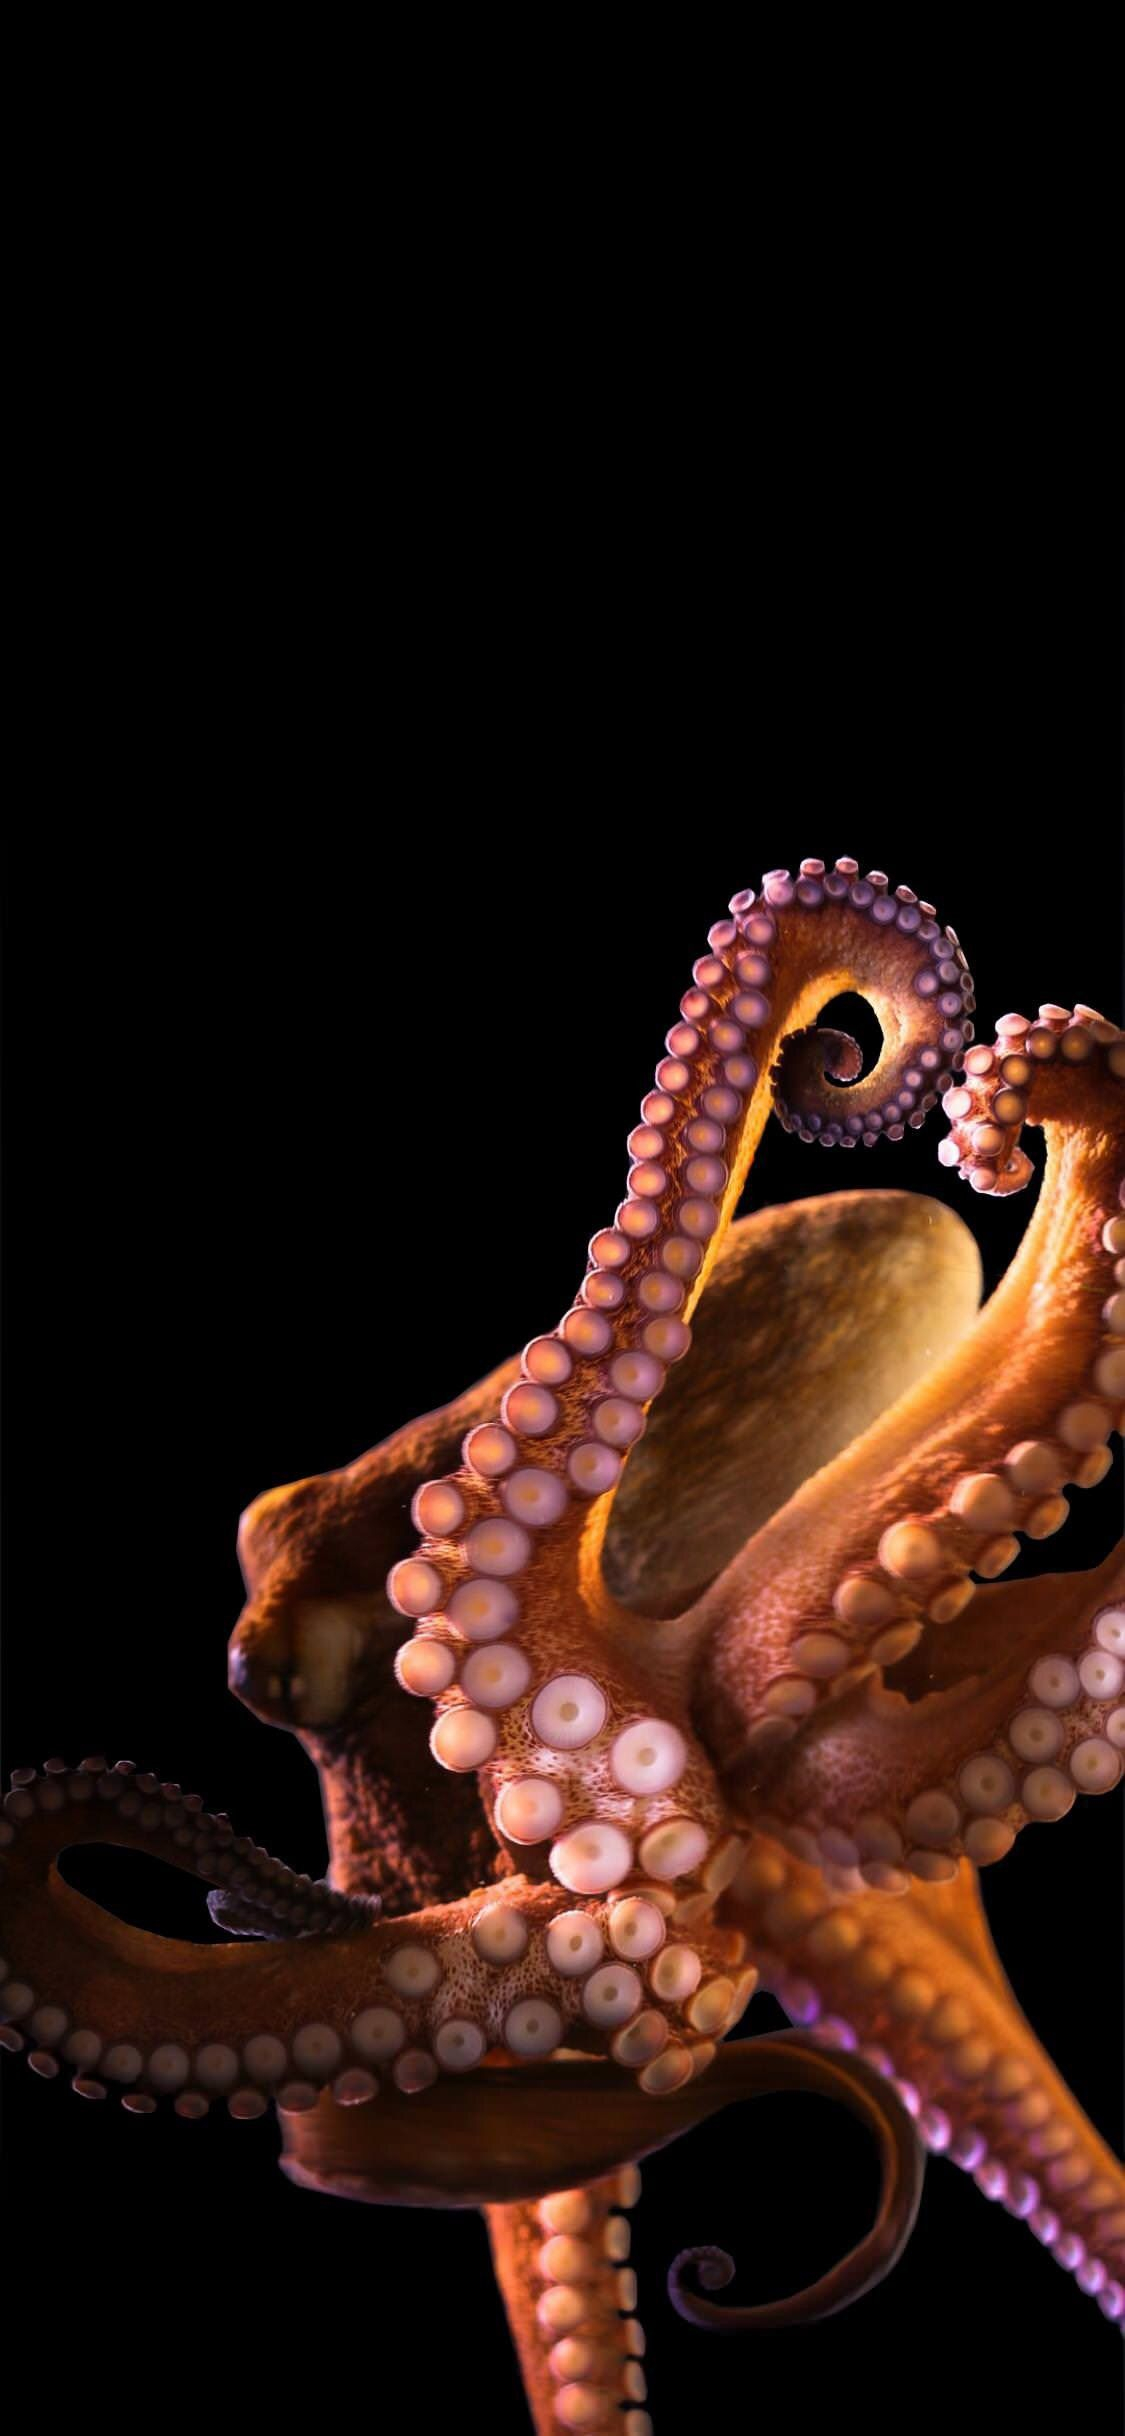 1125x2436 Pin by pamela&eth;&#159;&#140;&raquo; on iWallpapers | Octopus, Octopus wallpaper, Octopus photography